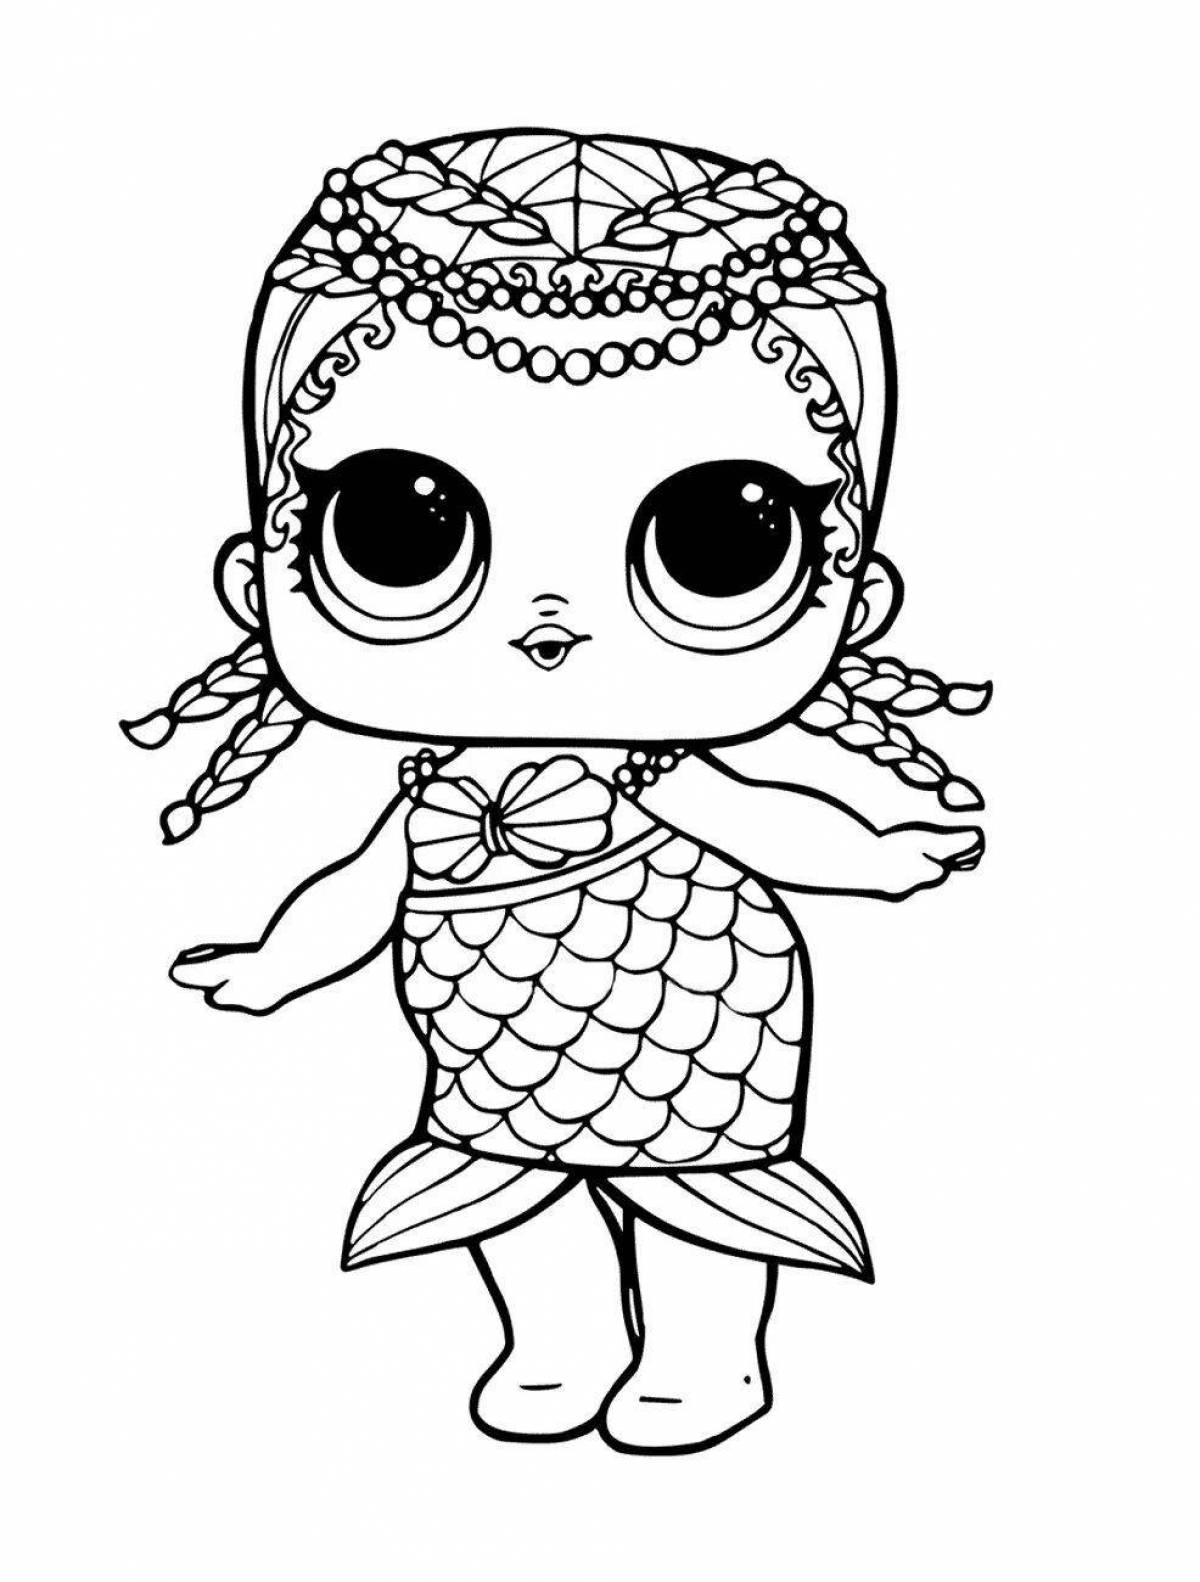 Fun coloring for Lola dolls for kids